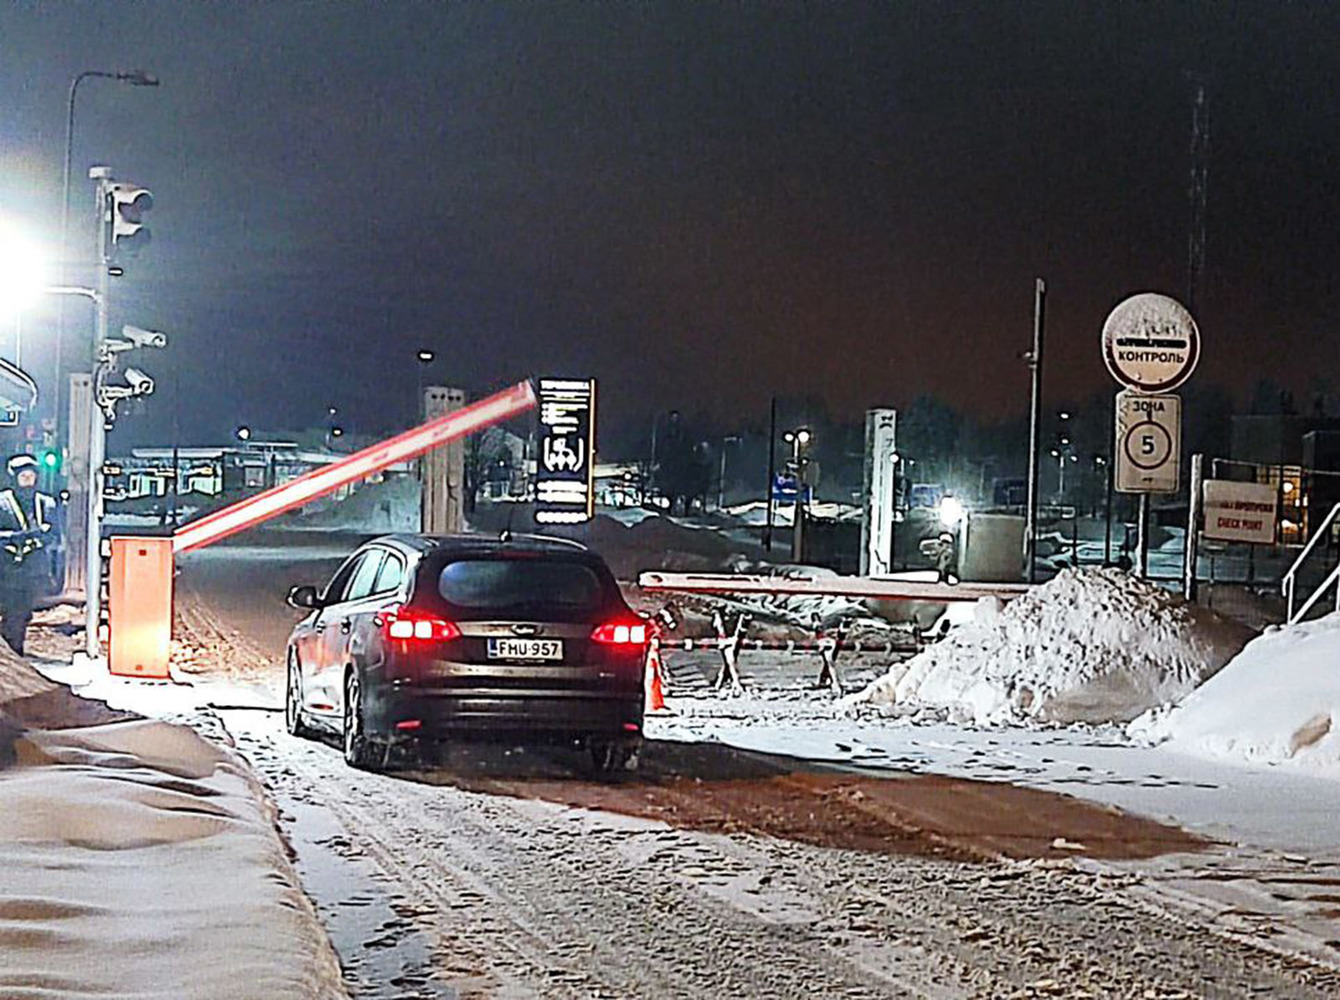 Finland has opened two border crossings on the border with Russia: let's go